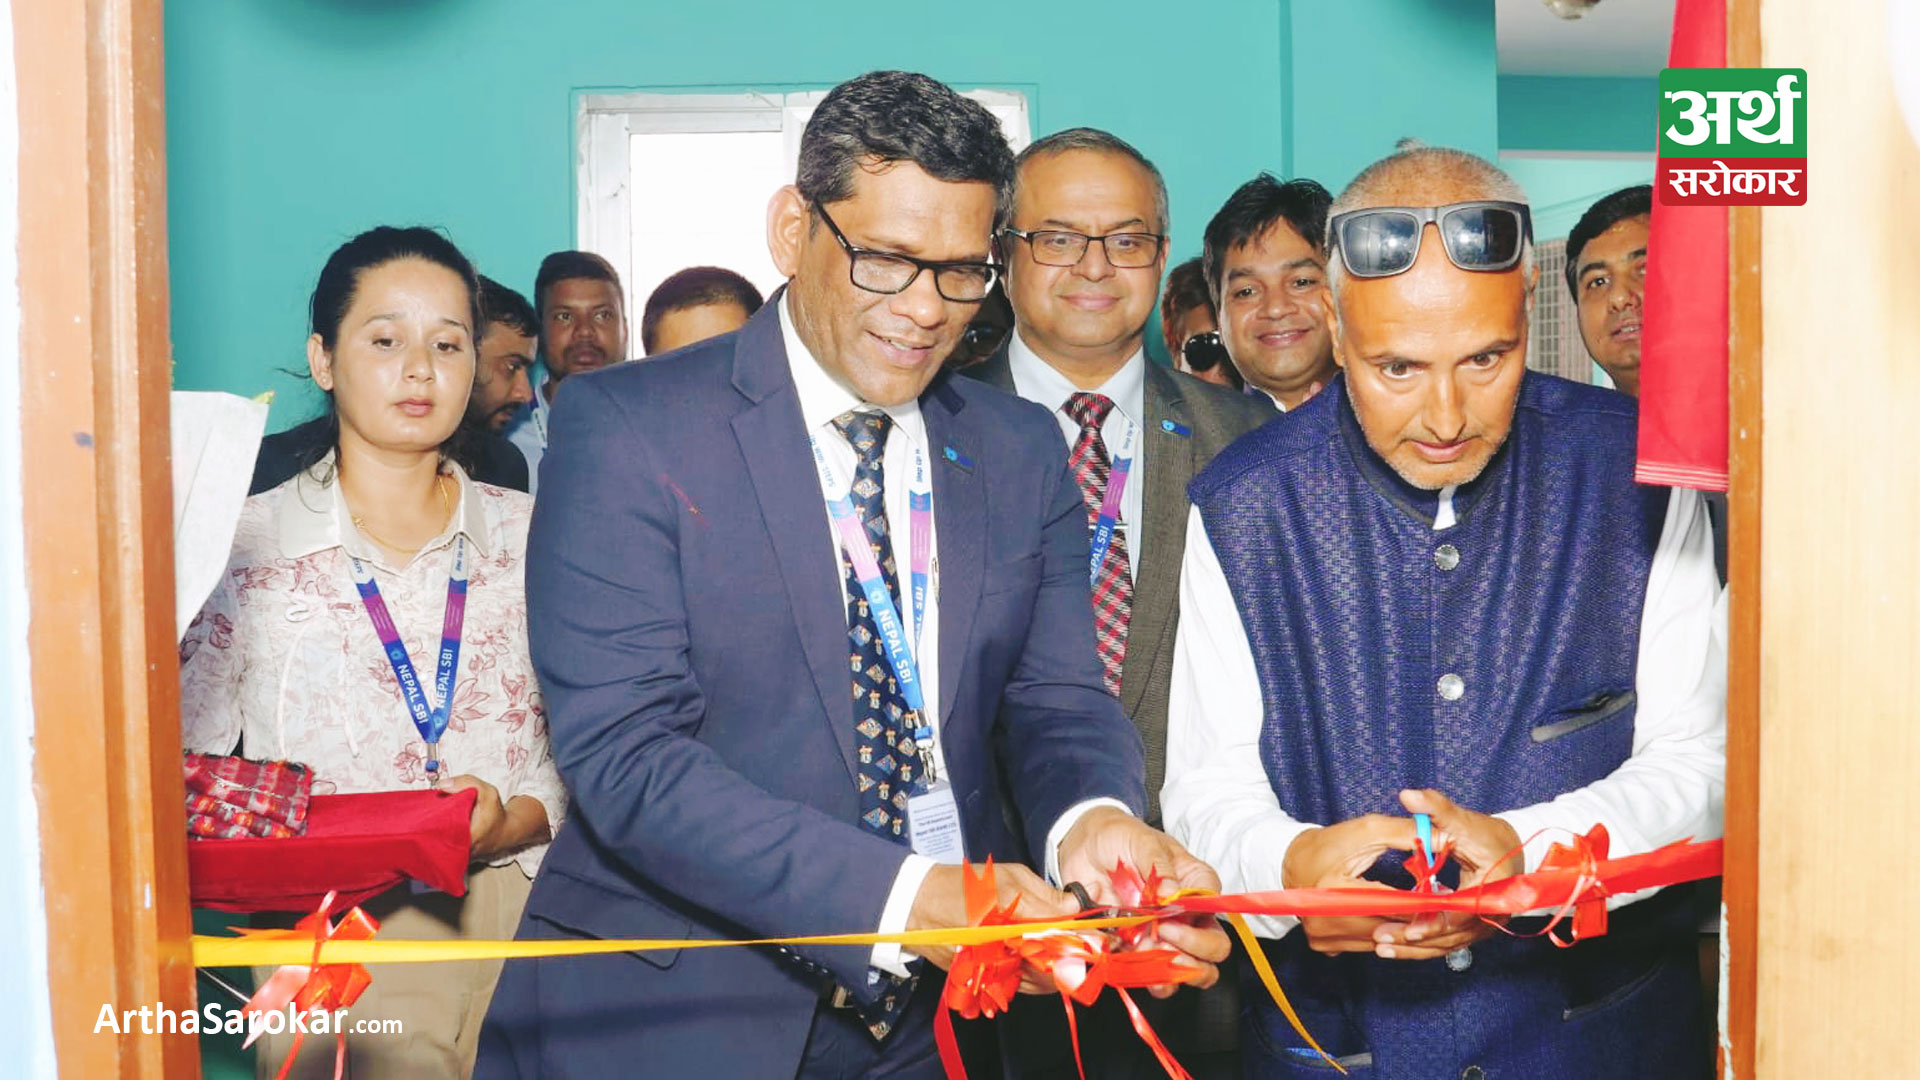 Nepal SBI Bank inaugurates the Kanchanpur Customs Office Extension Counter and relocates its Mahendranagar Branch